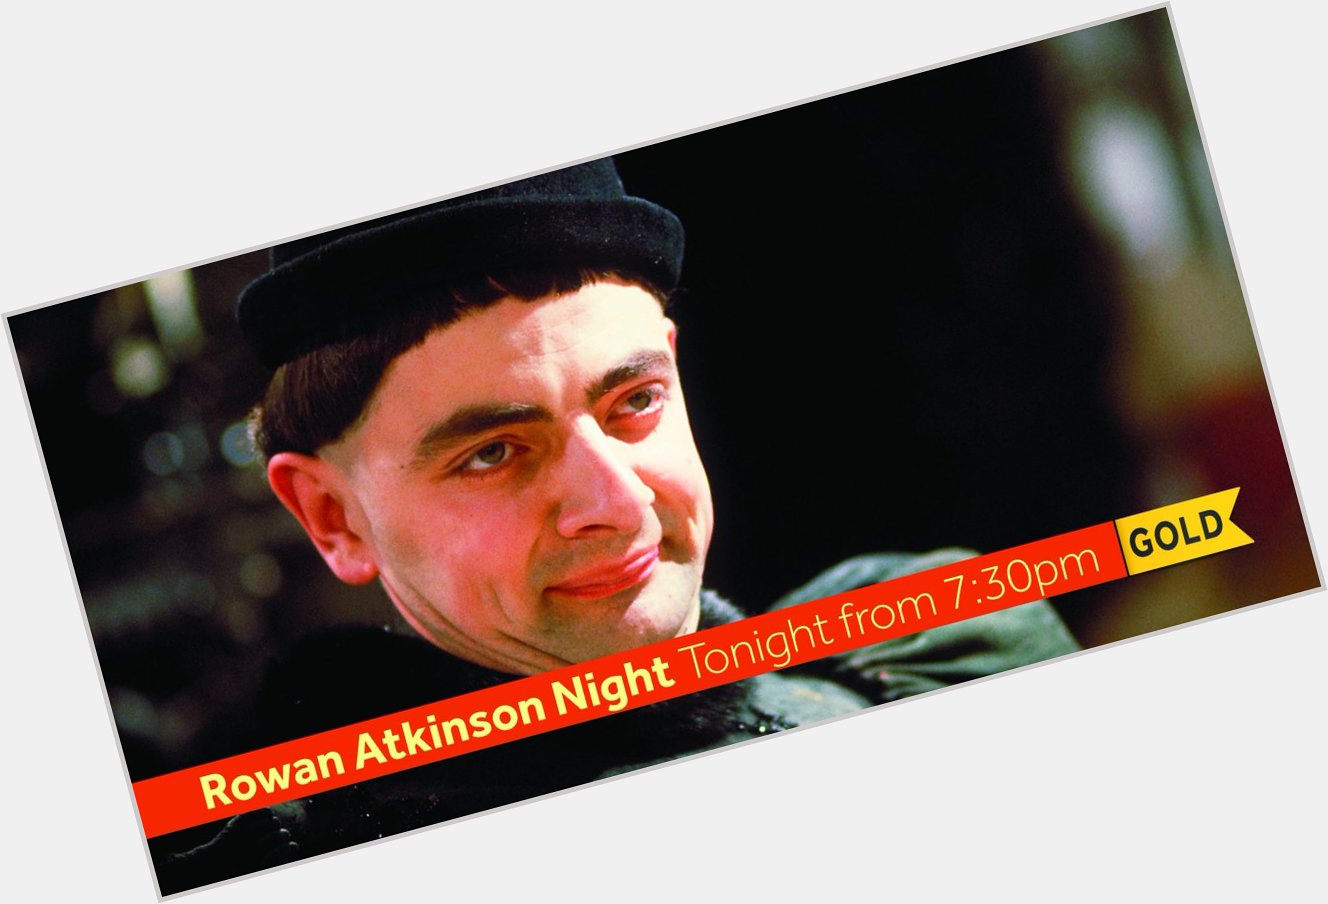 Happy birthday, Rowan Atkinson! Celebrate with an evening of his shows, including How very cunning. 